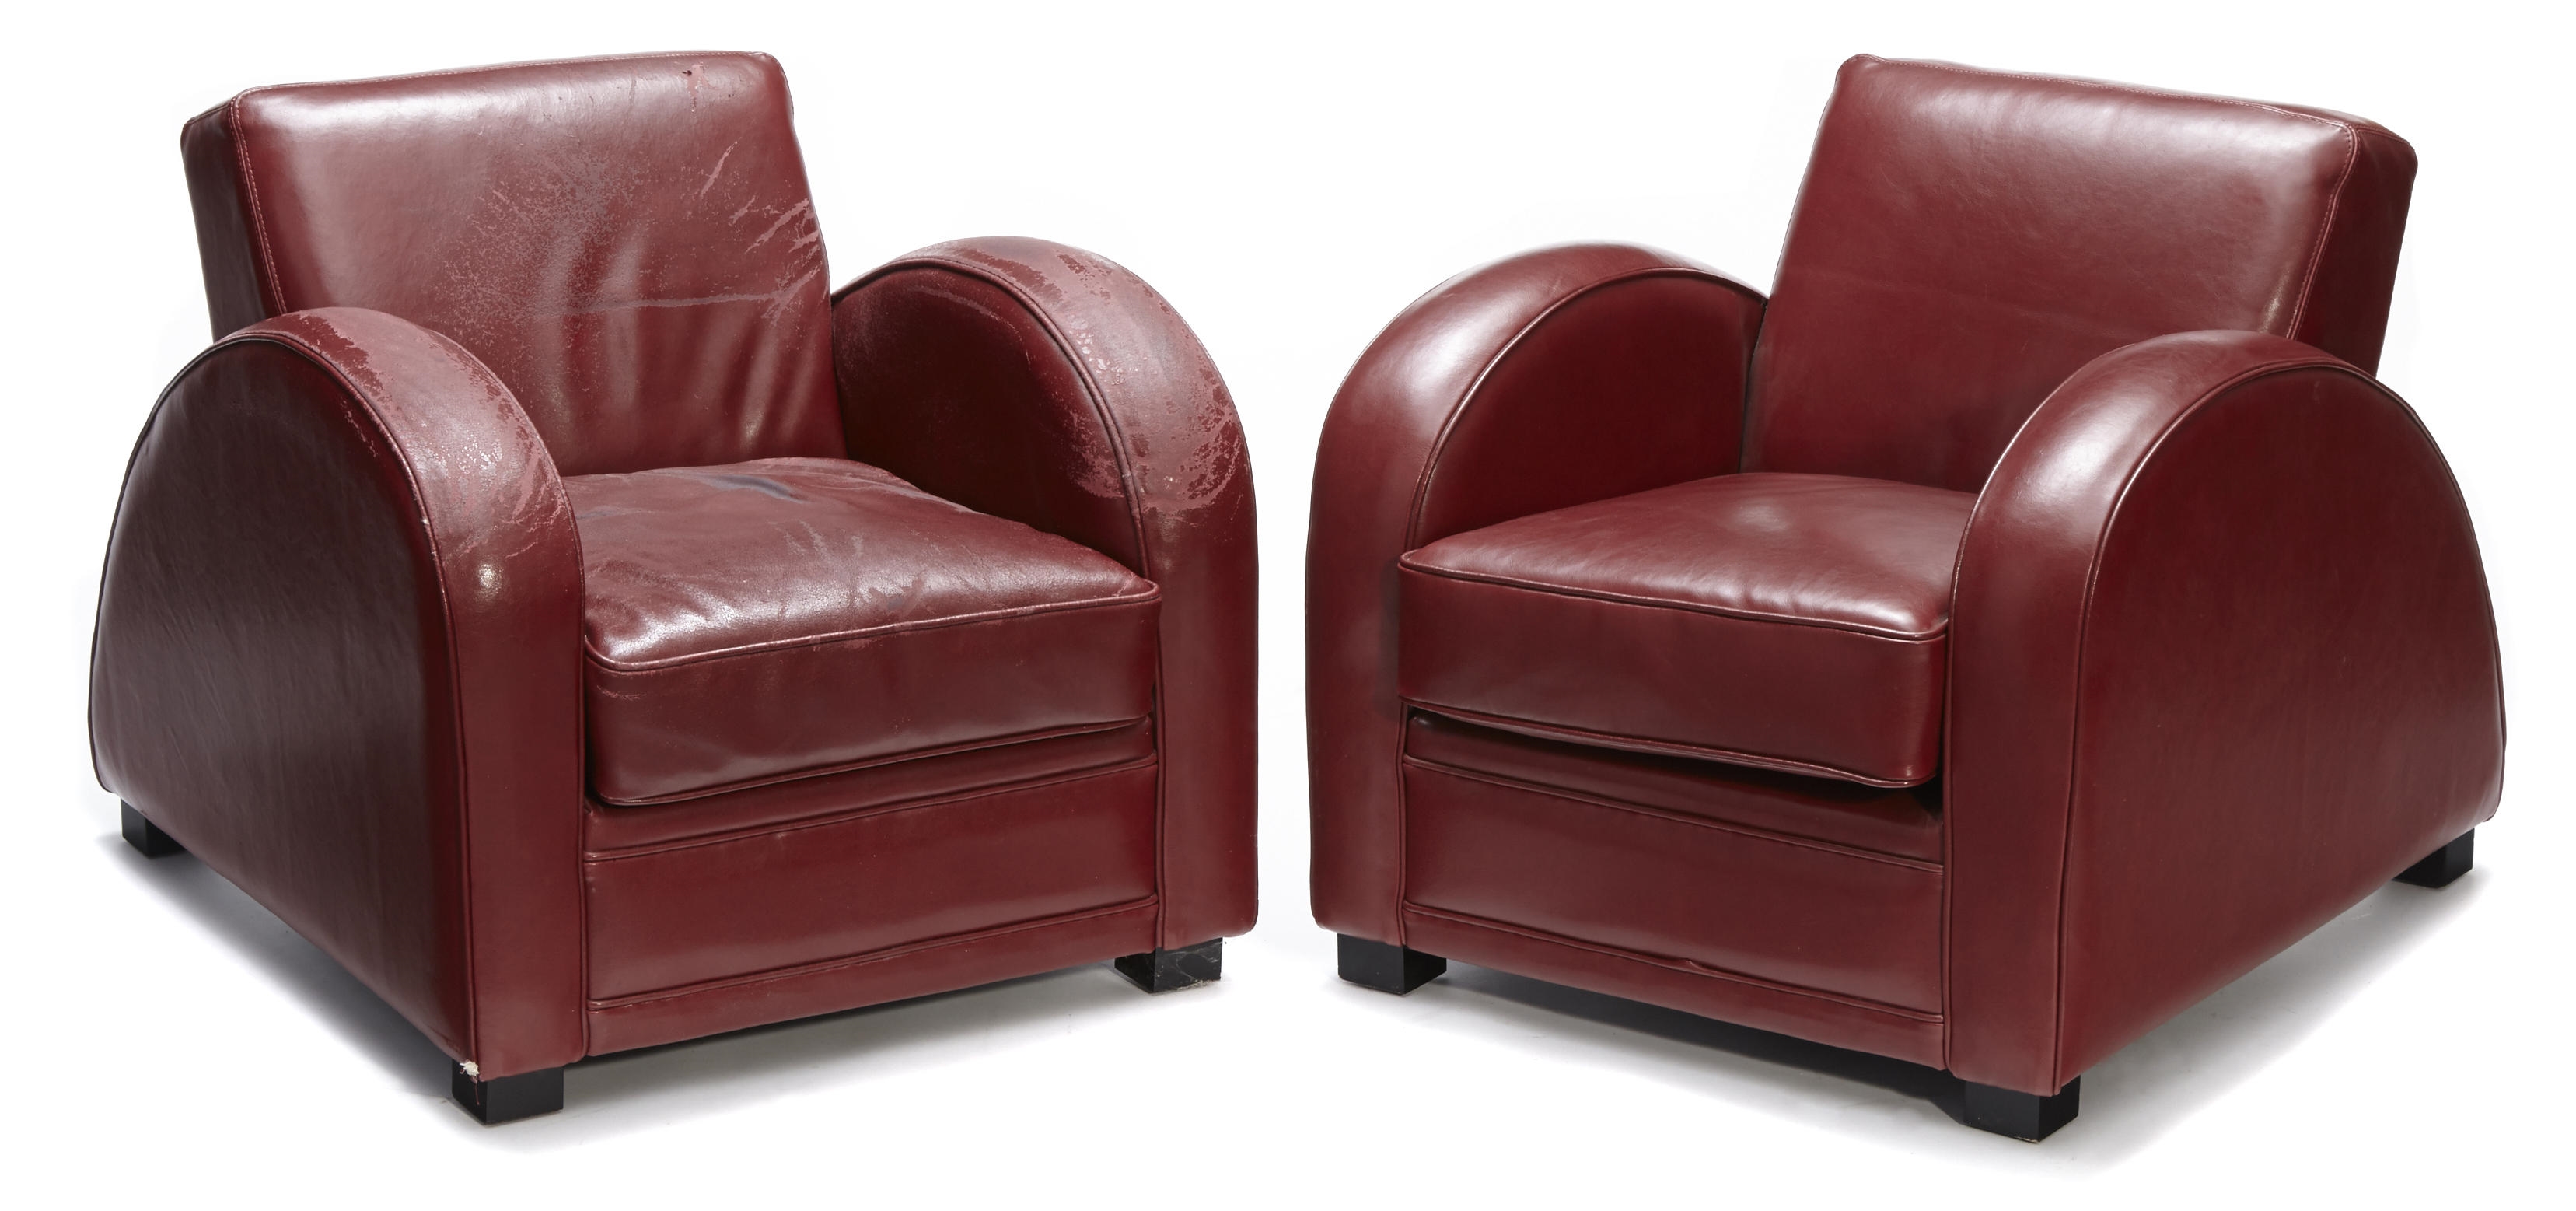 Red Faux Leather Club Chairs, Red Leather Club Chairs